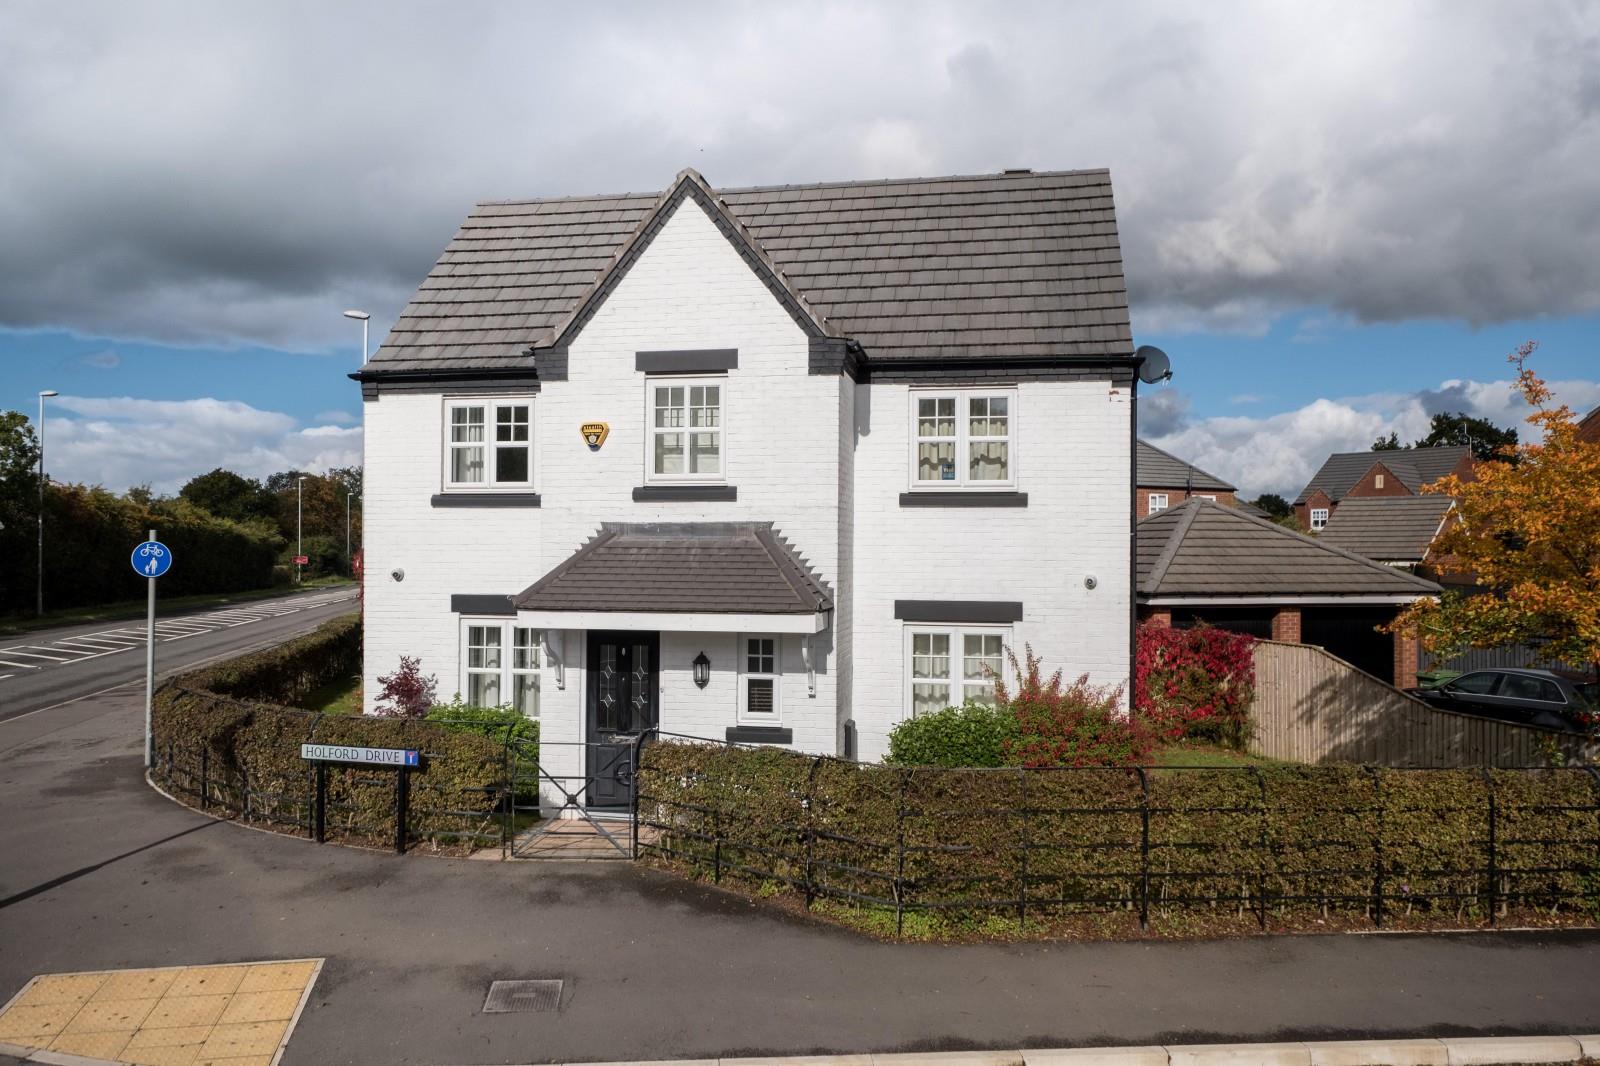 4 bedroom  Detached House for Sale in Winsford